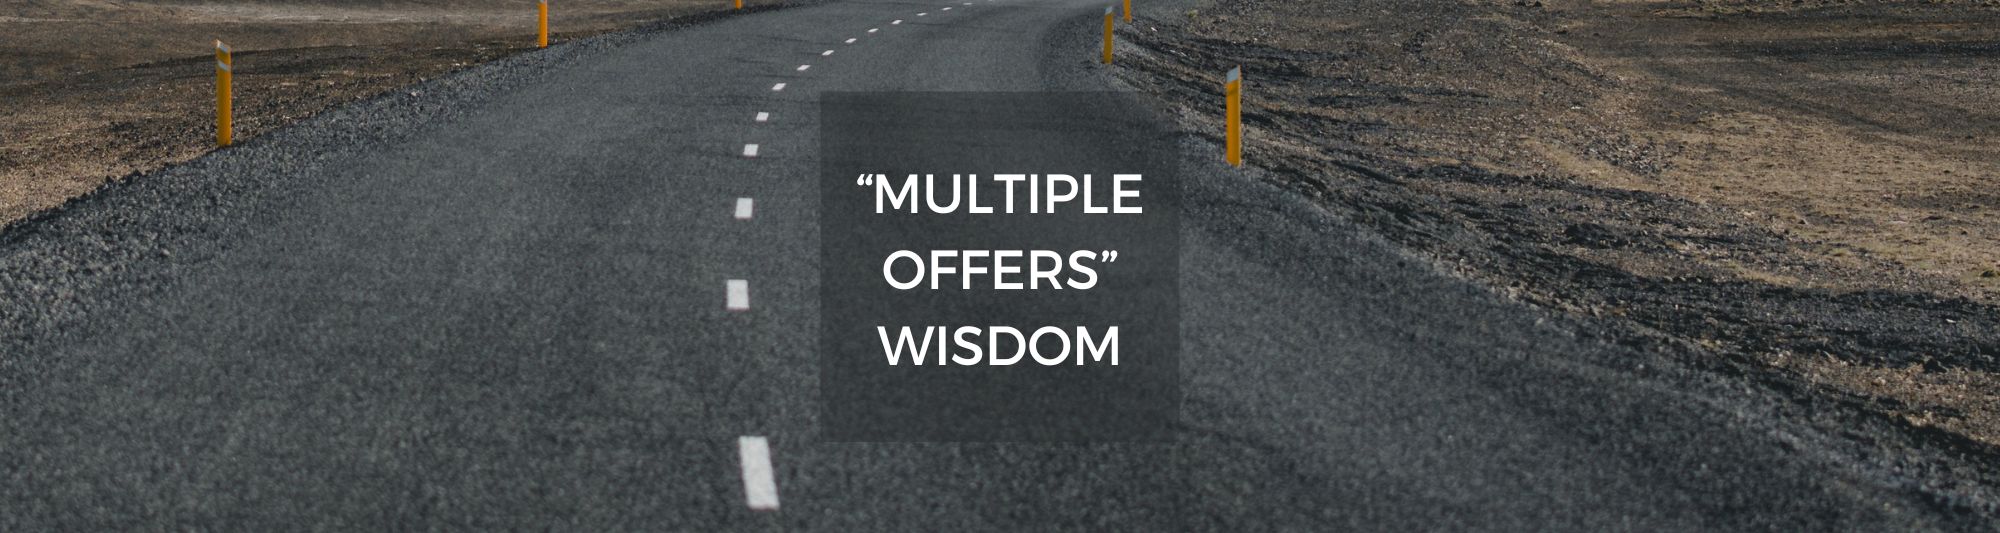 Photo of an asphalt road with text written over saying Multiple Offers